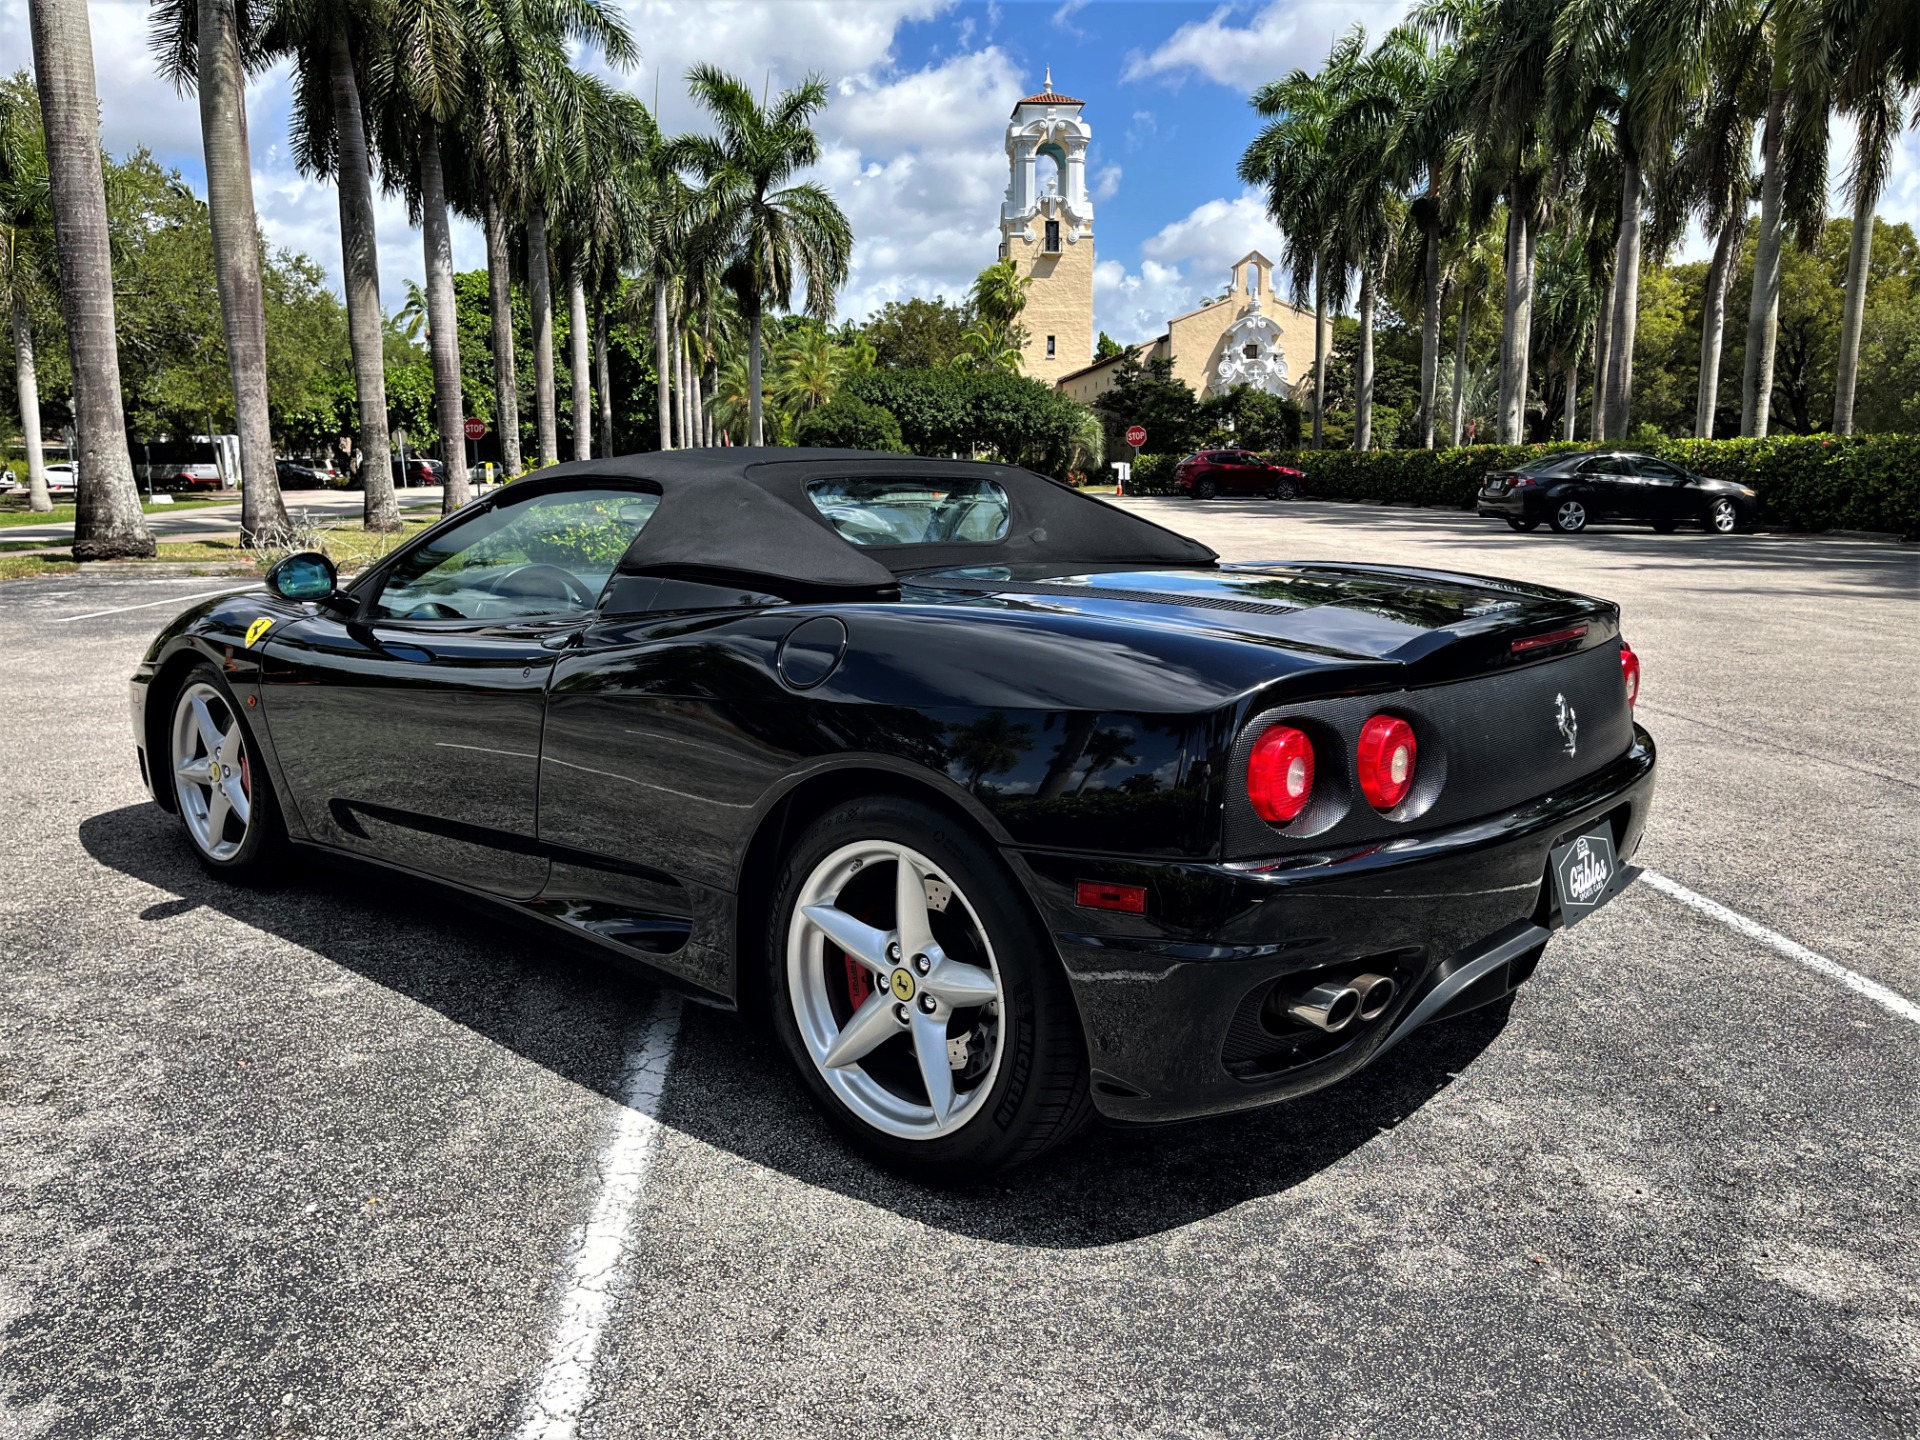 Used 2003 Ferrari 360 Spider for sale $98,850 at The Gables Sports Cars in Miami FL 33146 4